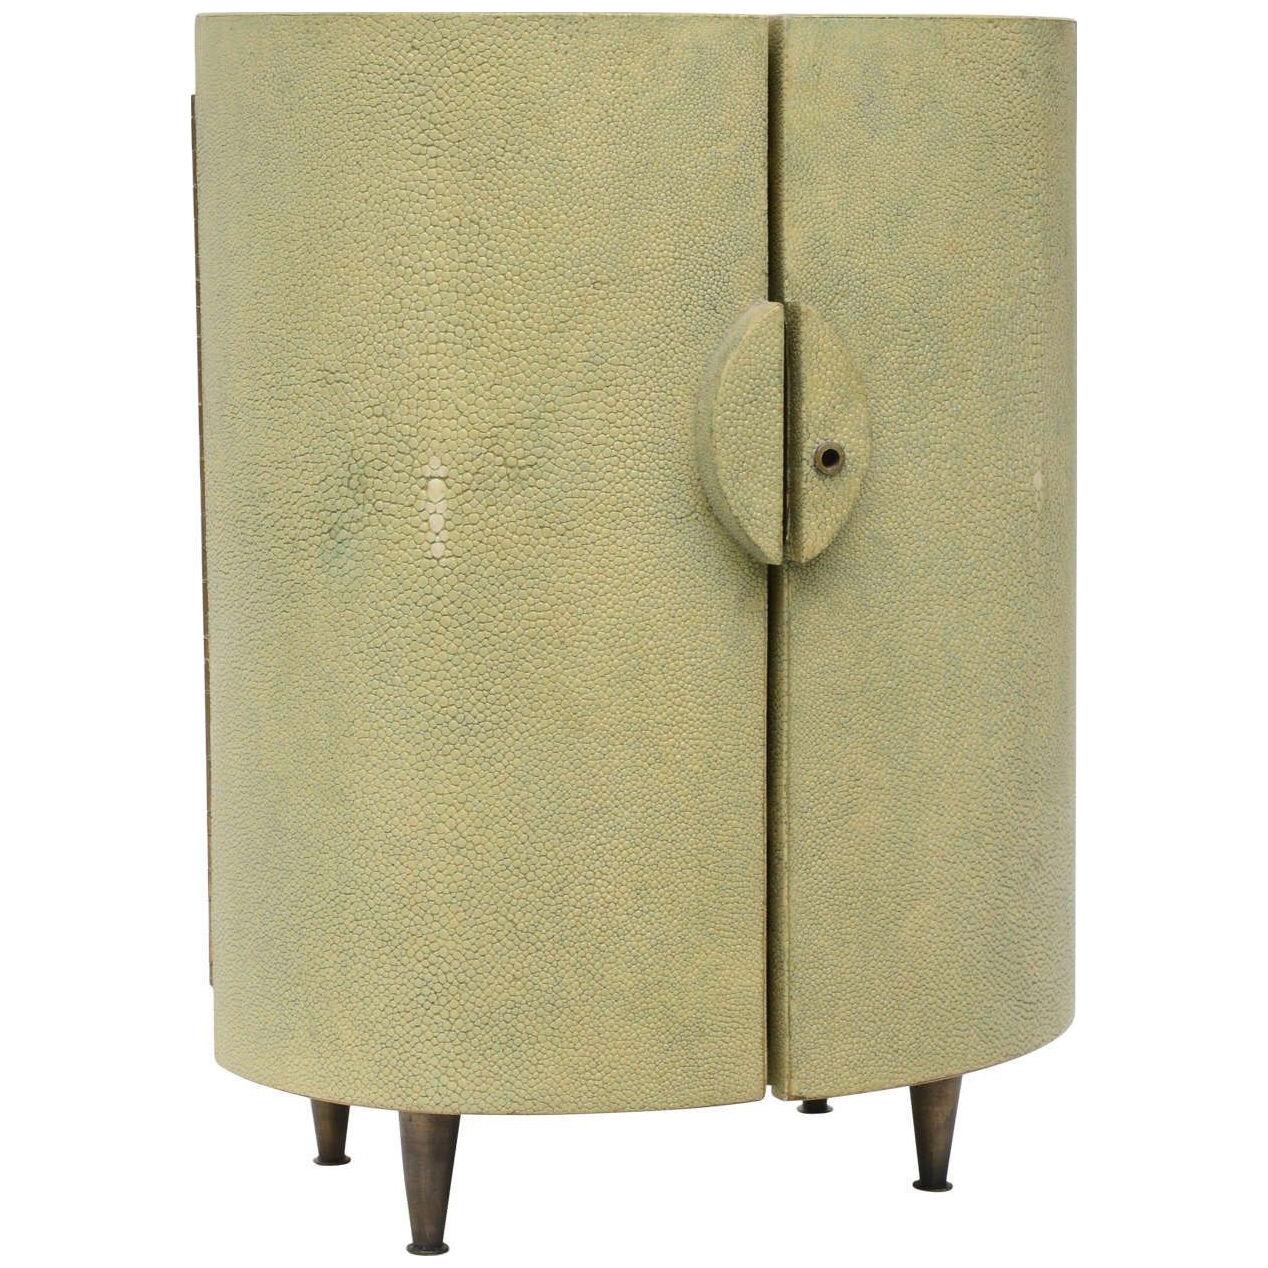 R & Y Augousti Shagreen Covered Jewelry Cabinet	